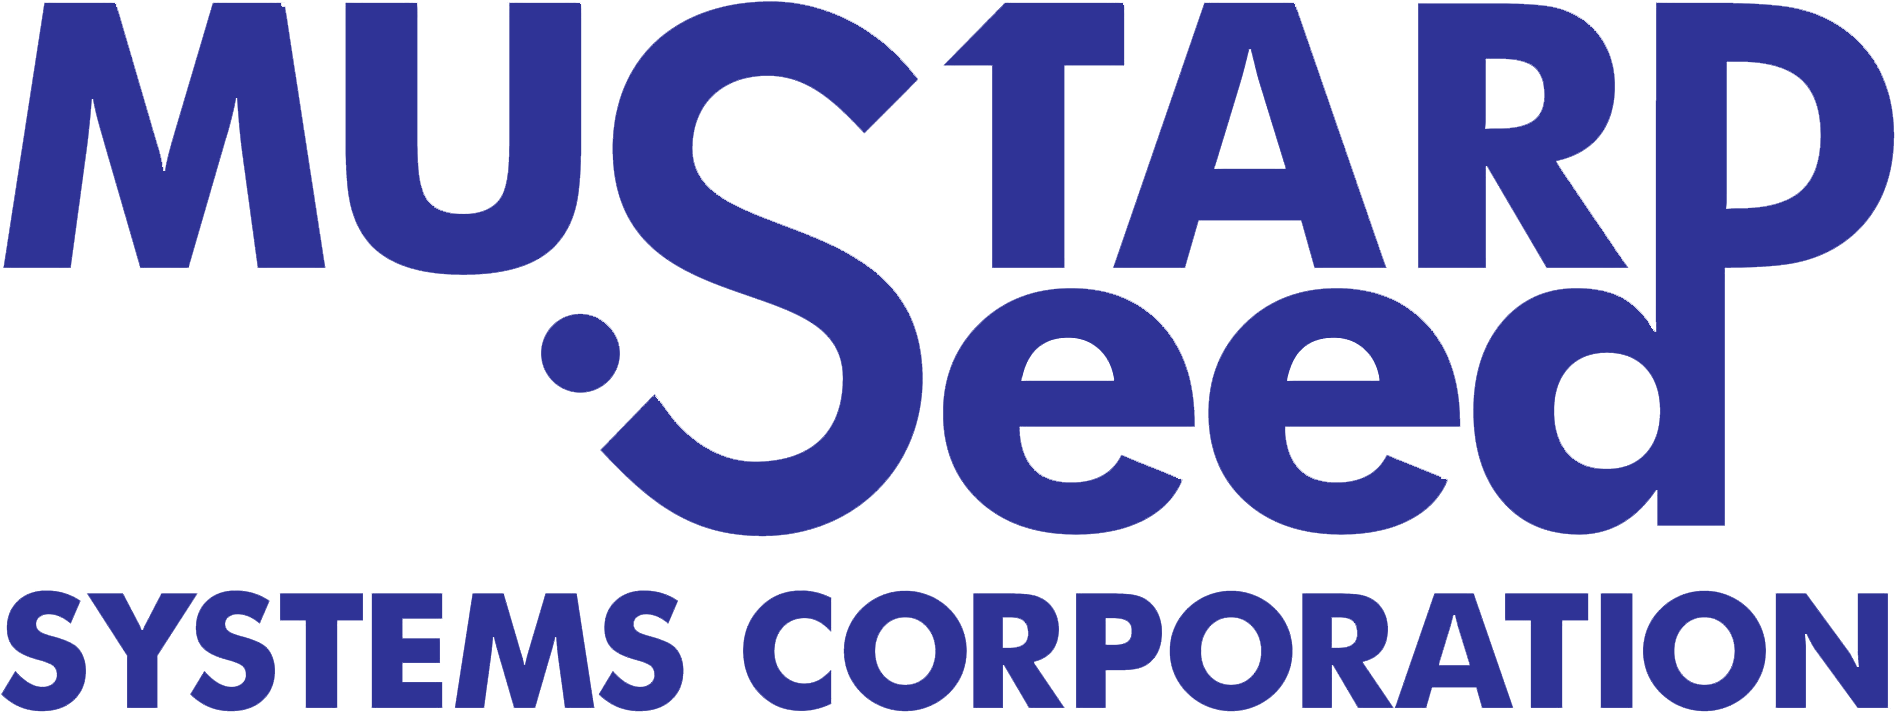 Mustard Seed Systems Corporation Logo PNG